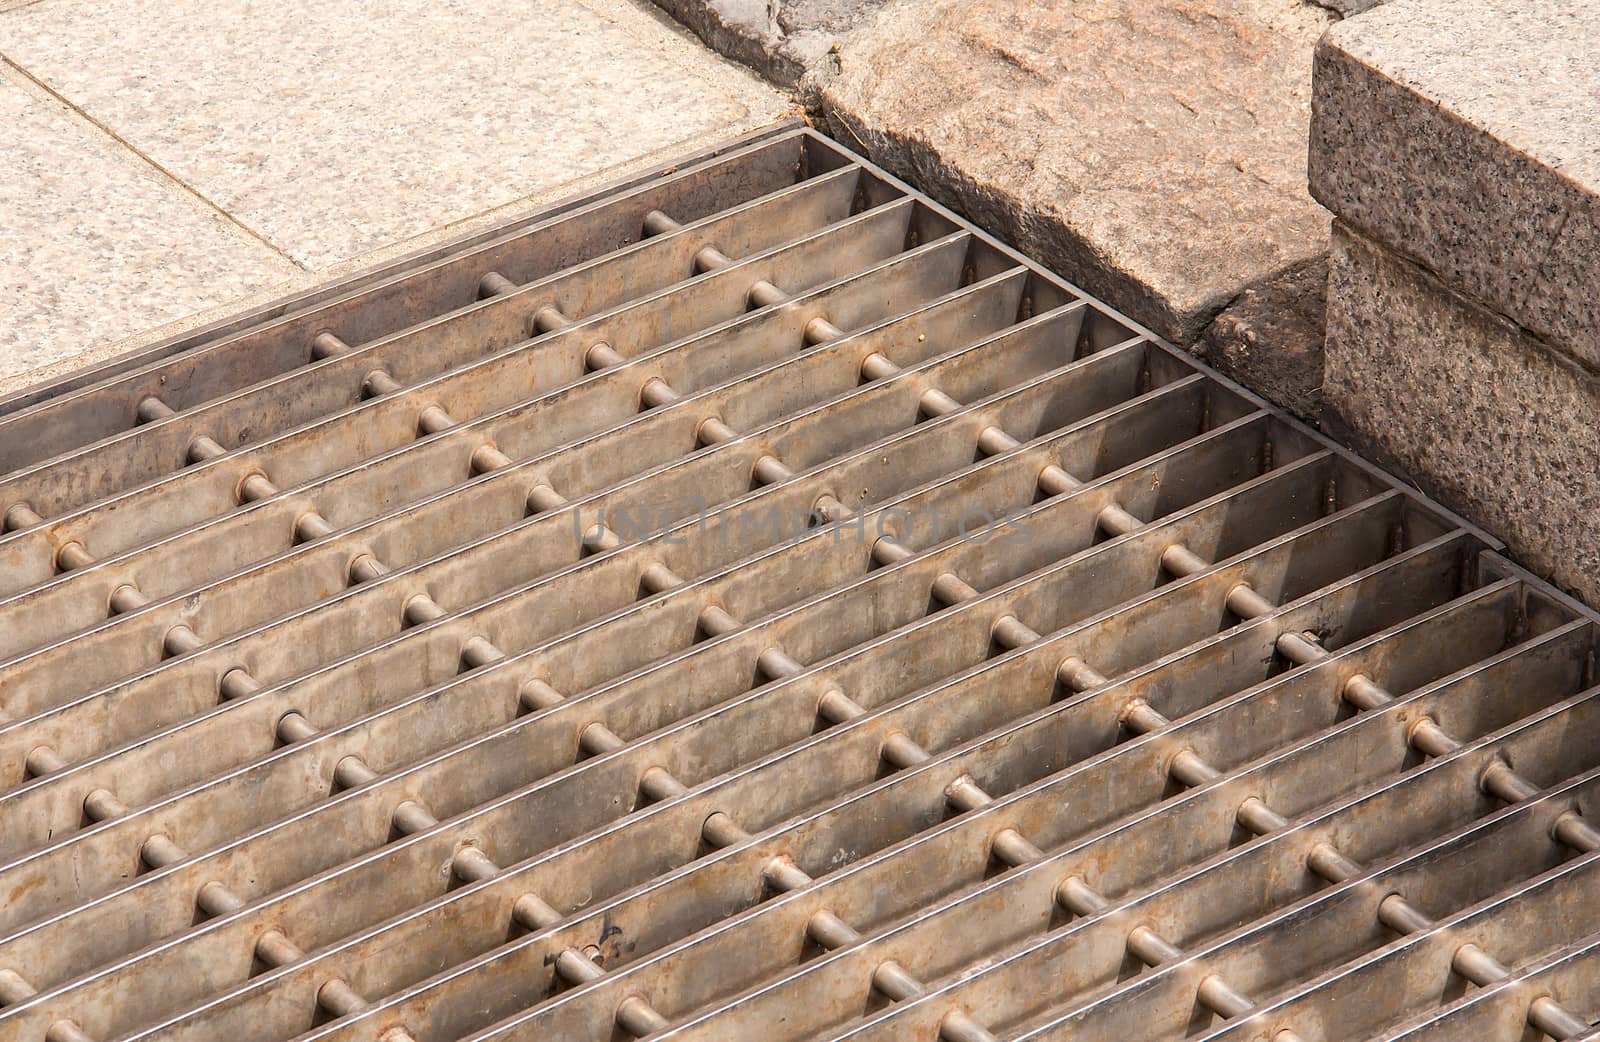 Iron grate off the drain.